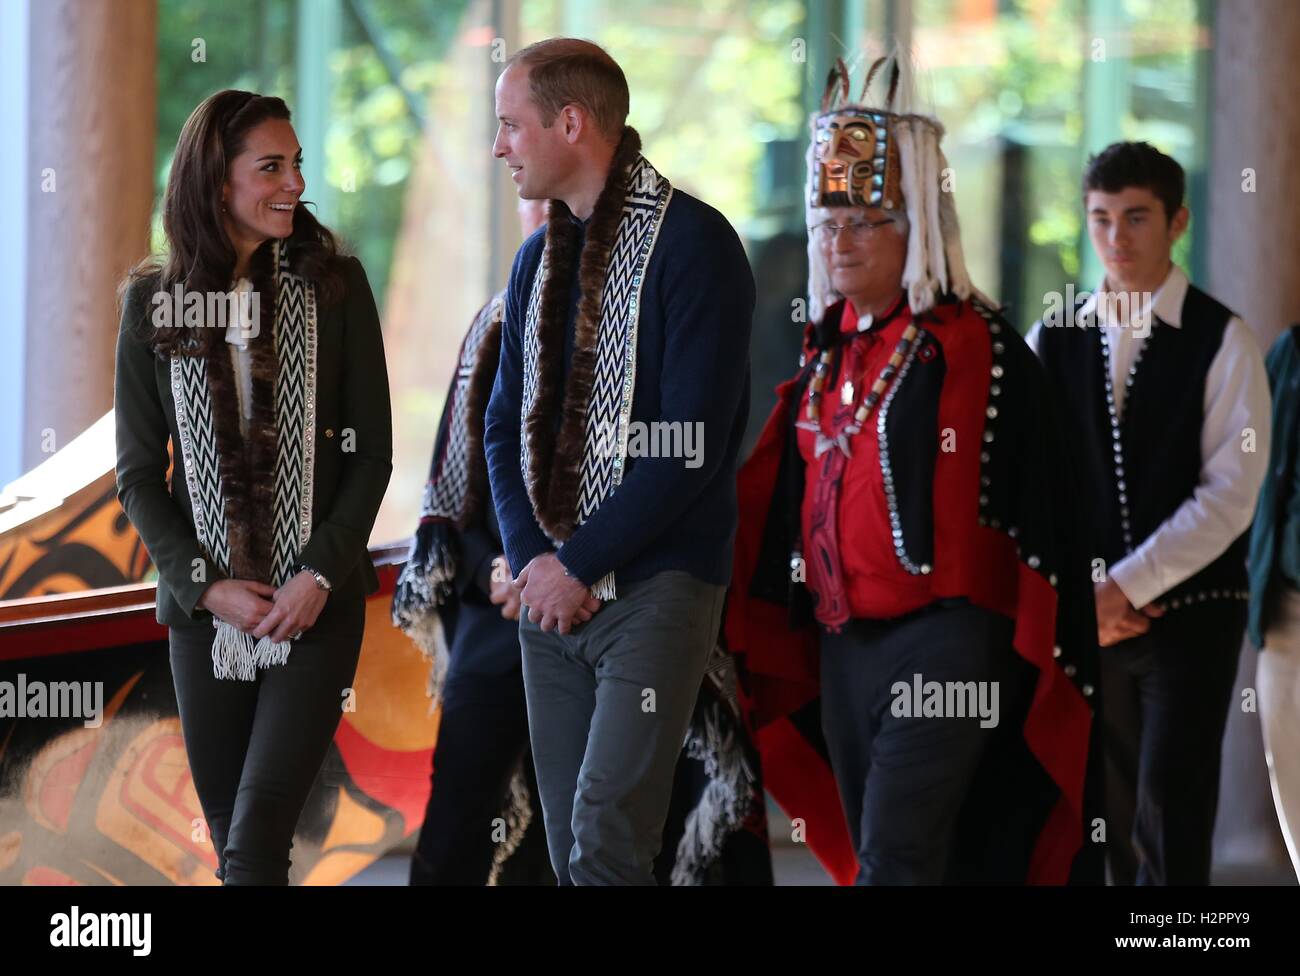 The Duke and Duchess of Cambridge inside the Carving House at the Haida Heritage Centre and Museum at Skidegate on the island of Haida Gwaii, British Columbia during the Royal Tour of Canada. Stock Photo